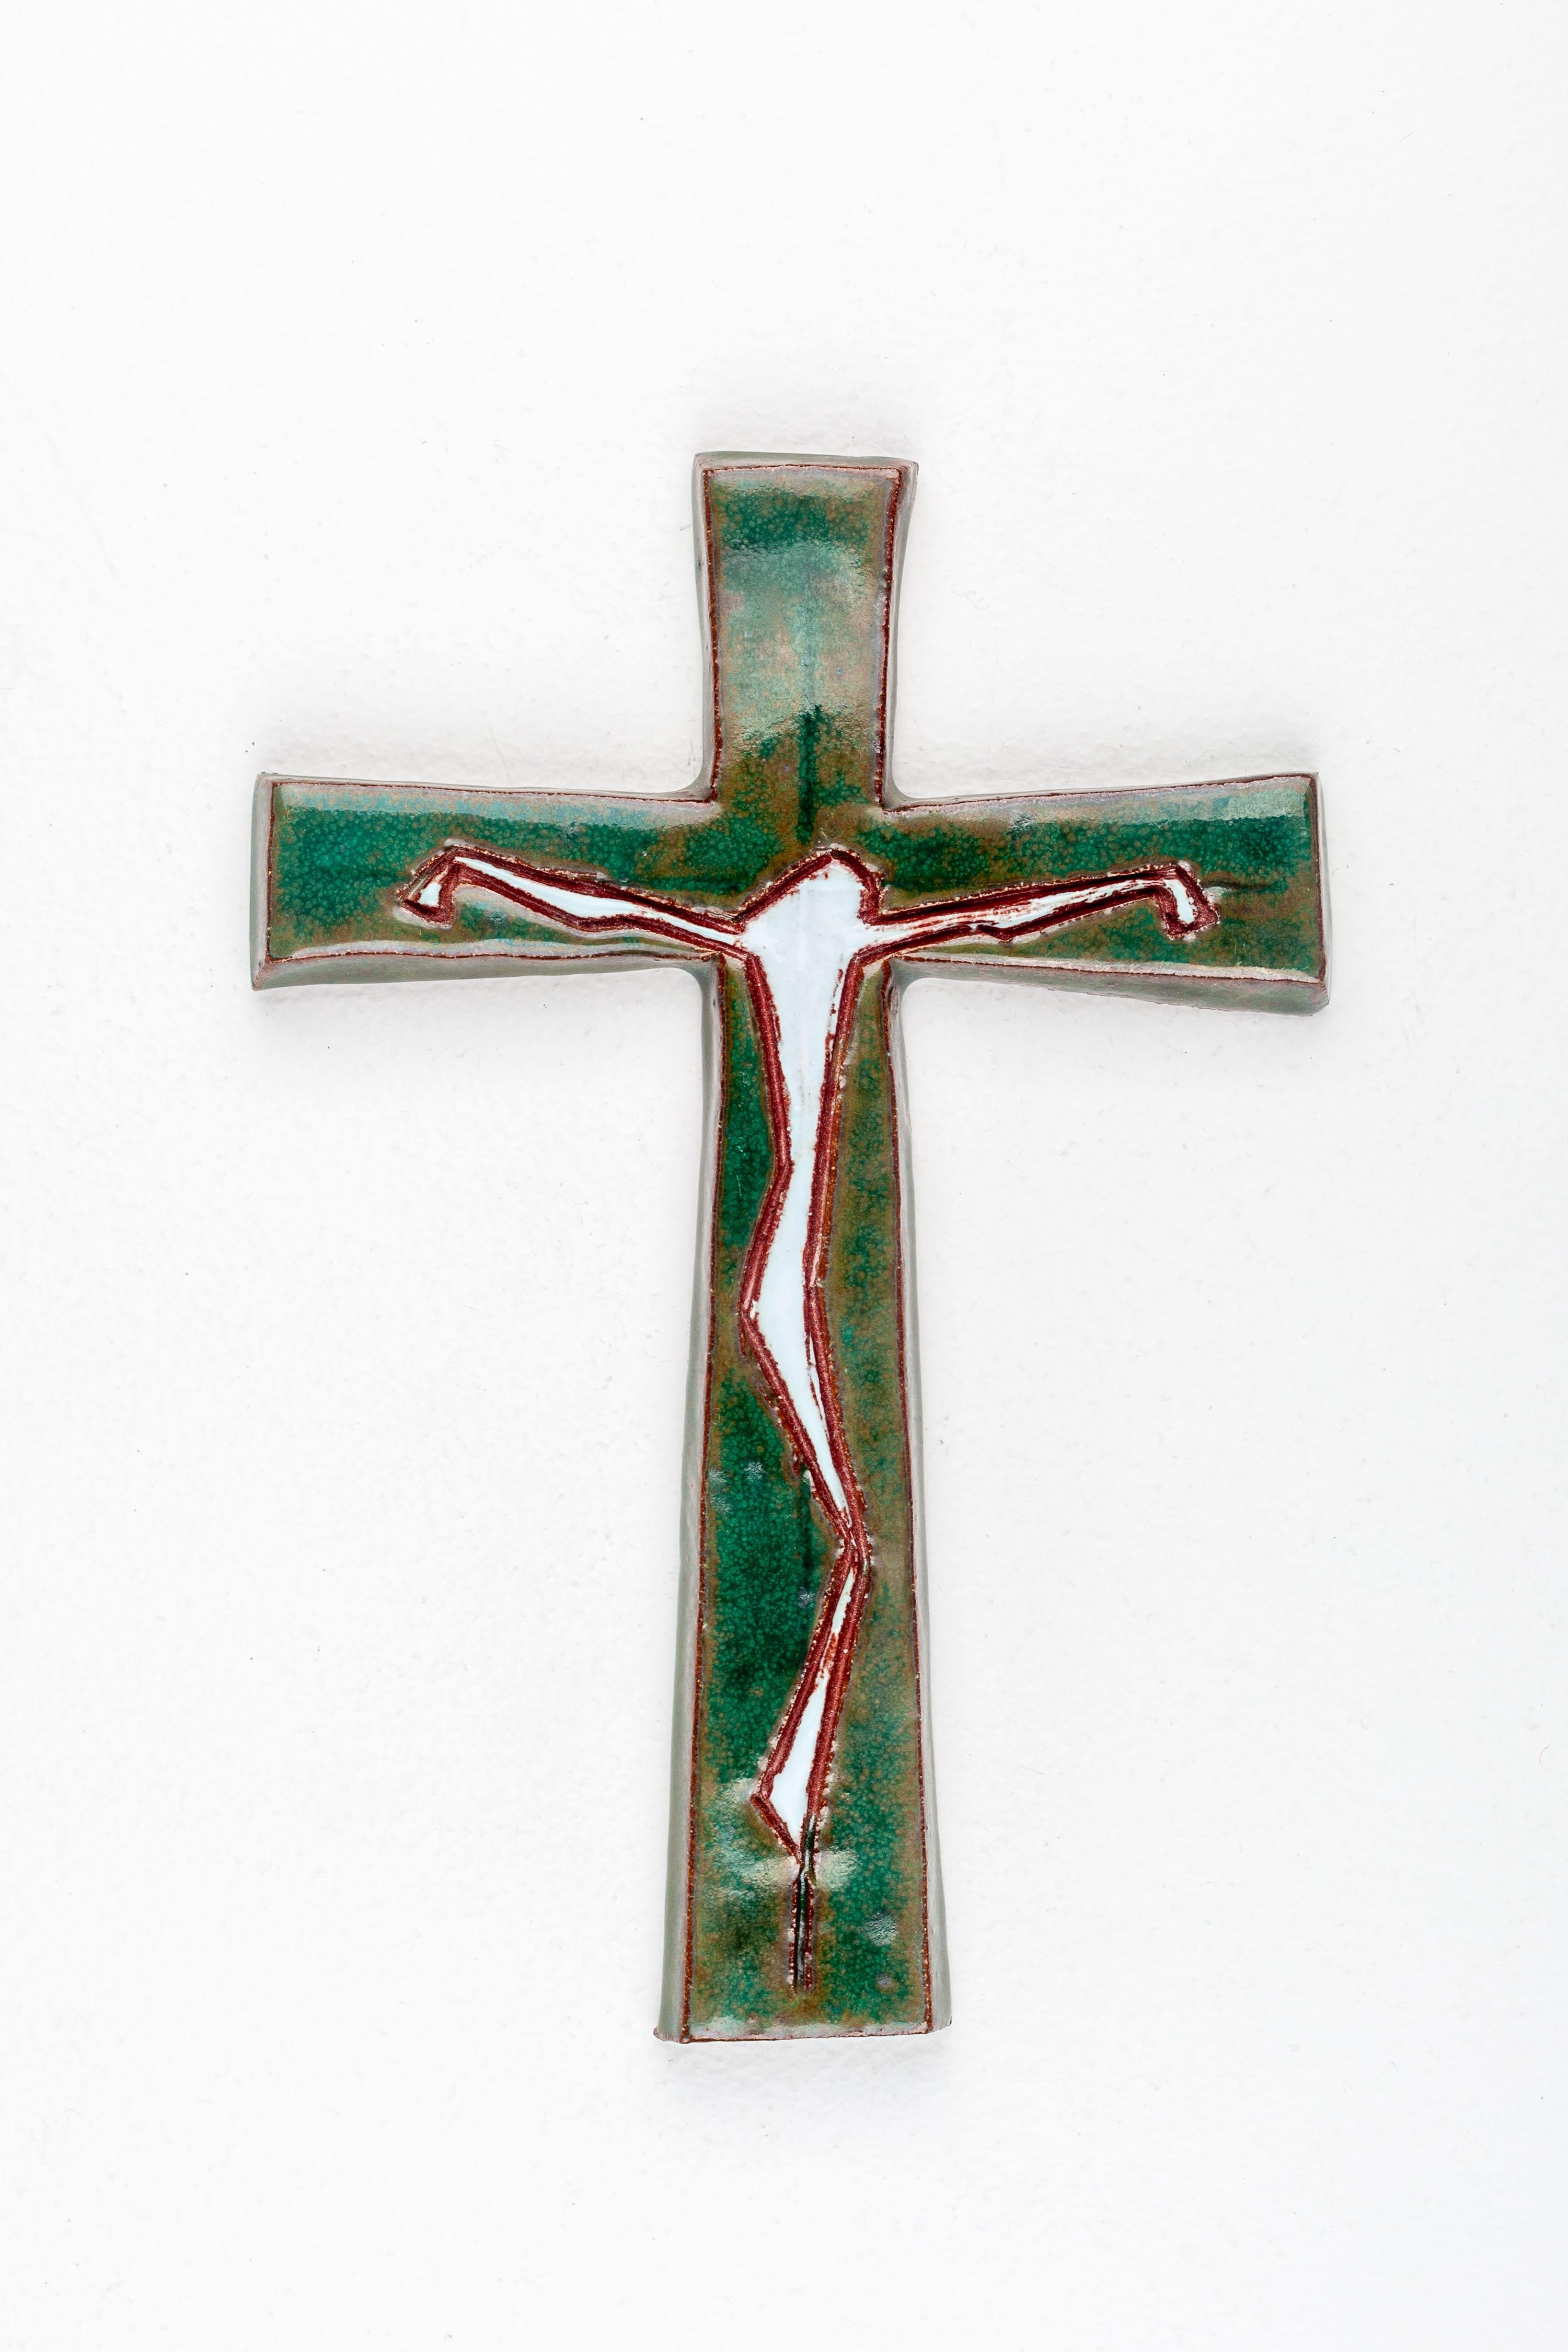 This ceramic wall cross, hand-painted in textured greens and ocher beige, features a depiction of Christ in painted white. The angular portrayal of Christ, rendered in straight terracotta lines, stands at the center of a cross with larger ends. This